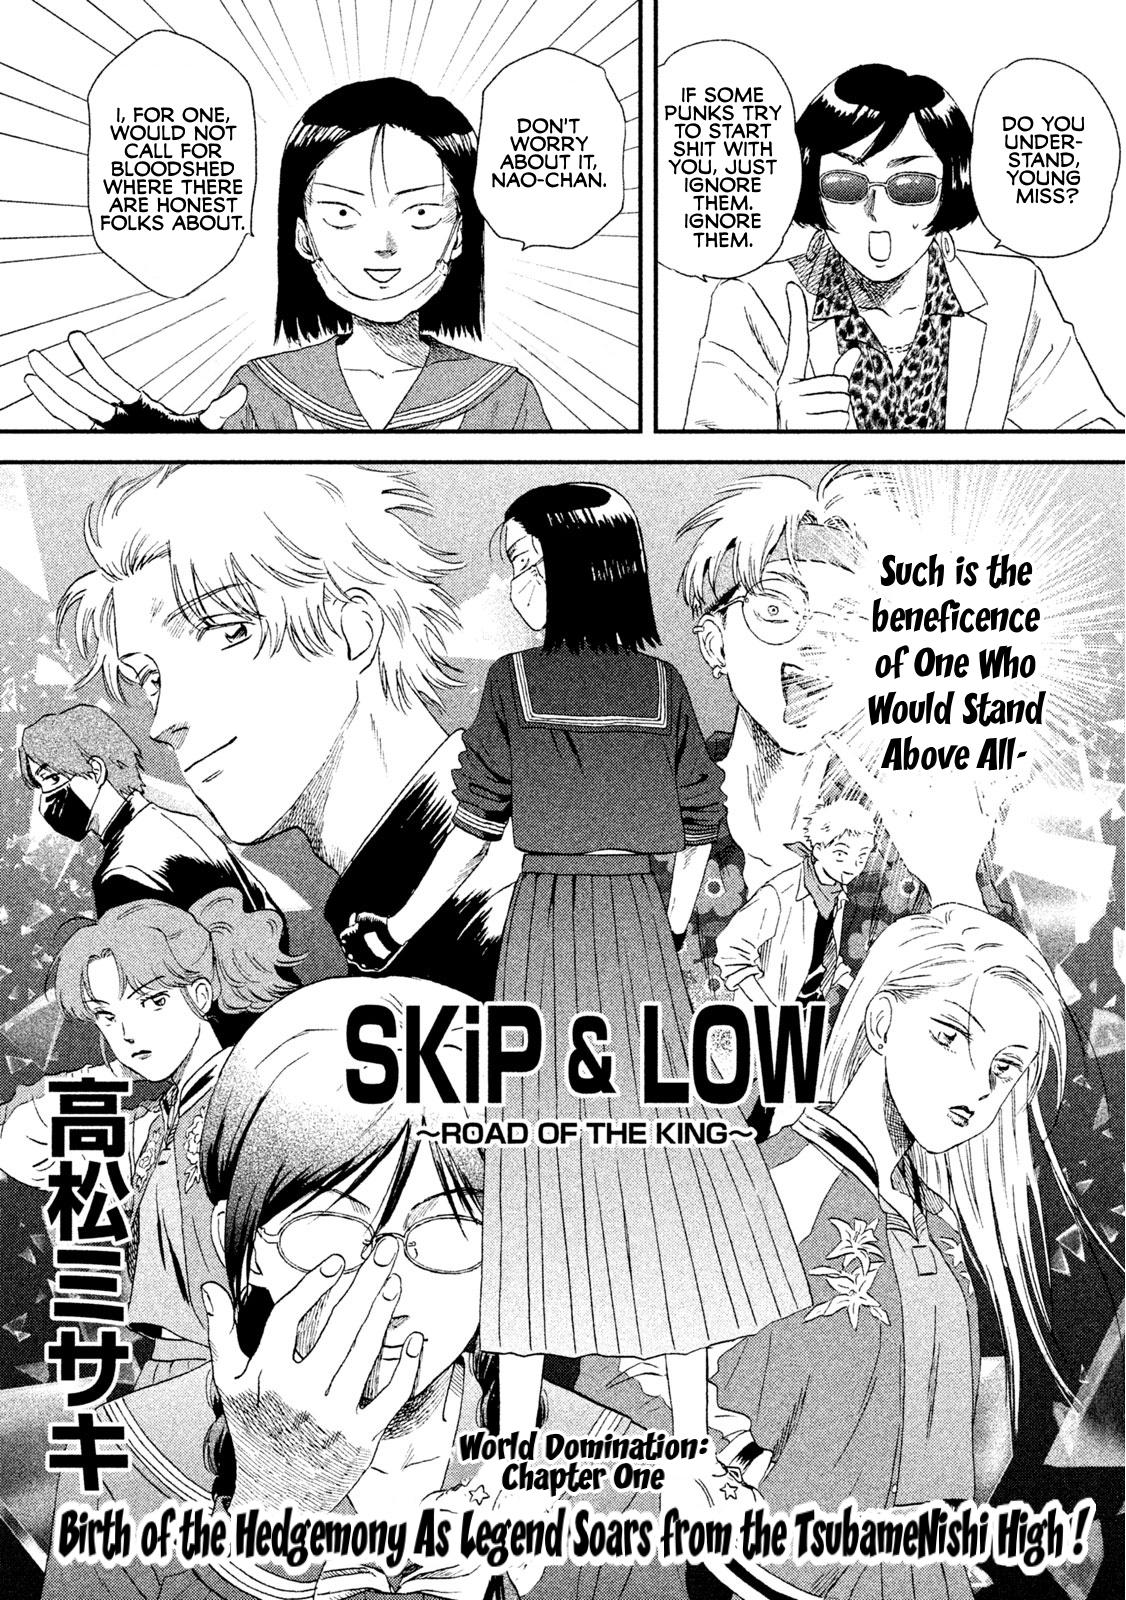 Skip to Loafer Vol.10 Ch.56 Page 16 - Mangago